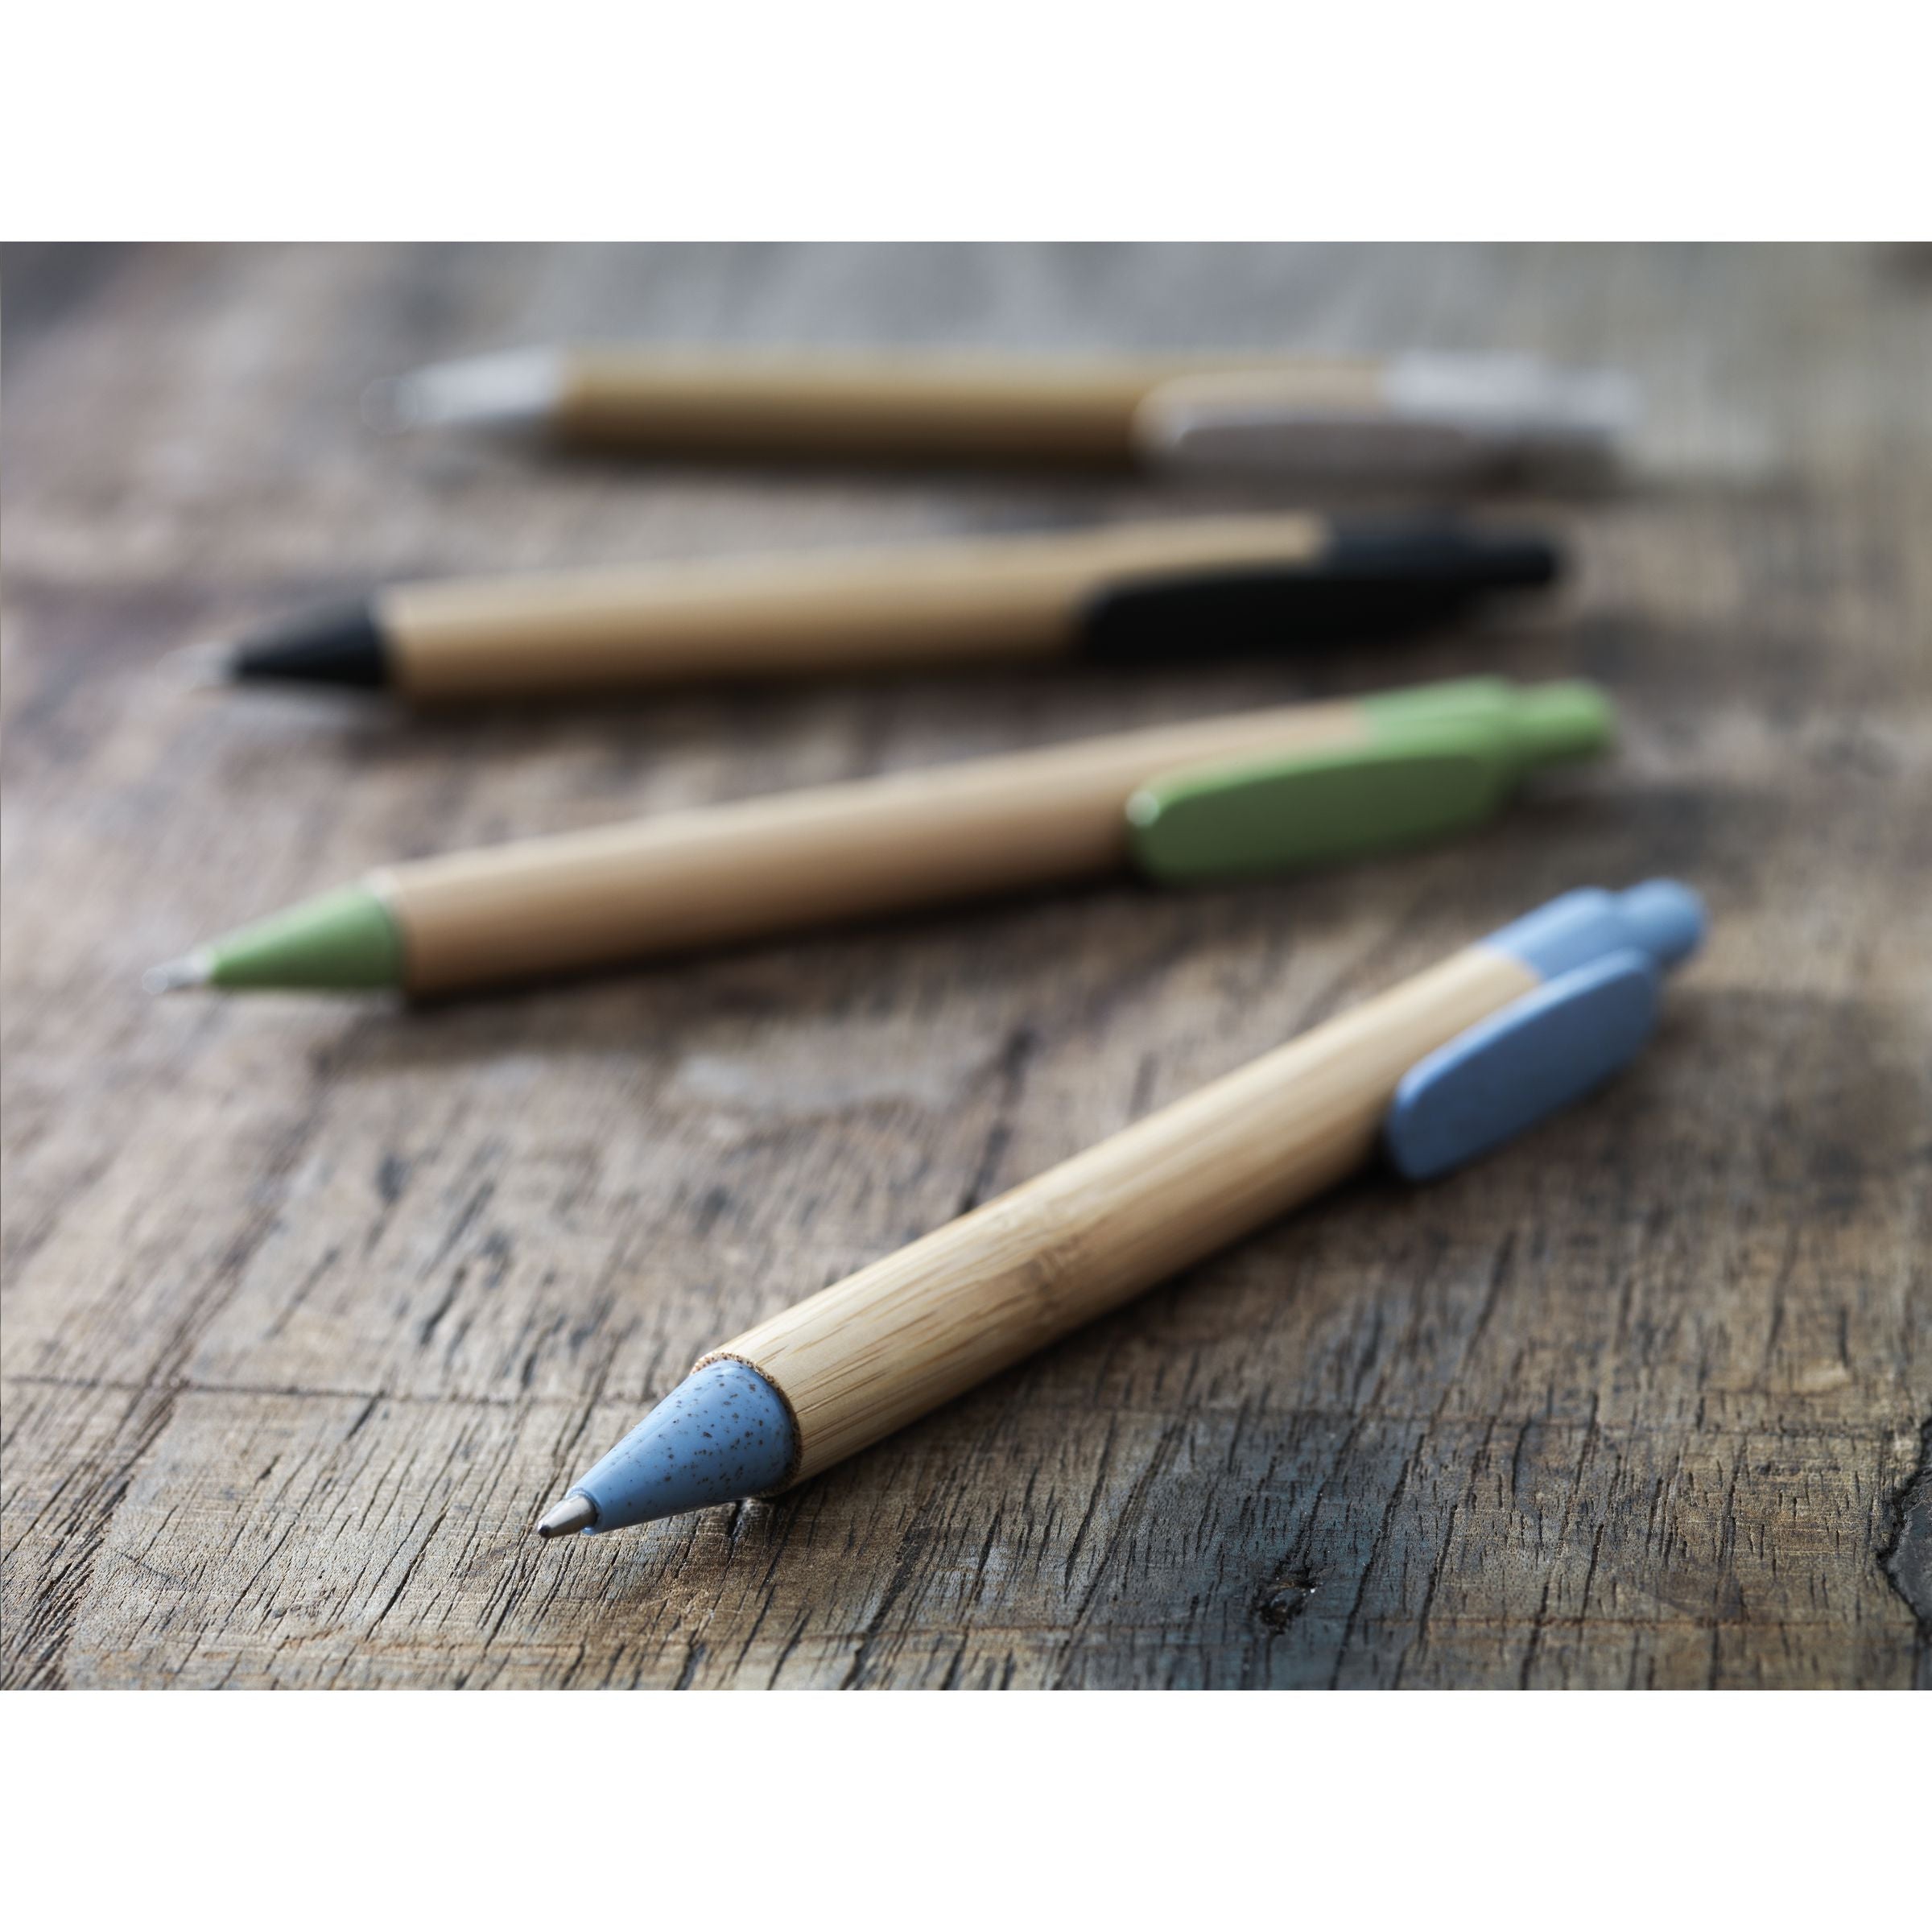 Bamboo Wheat Pen From £0.92